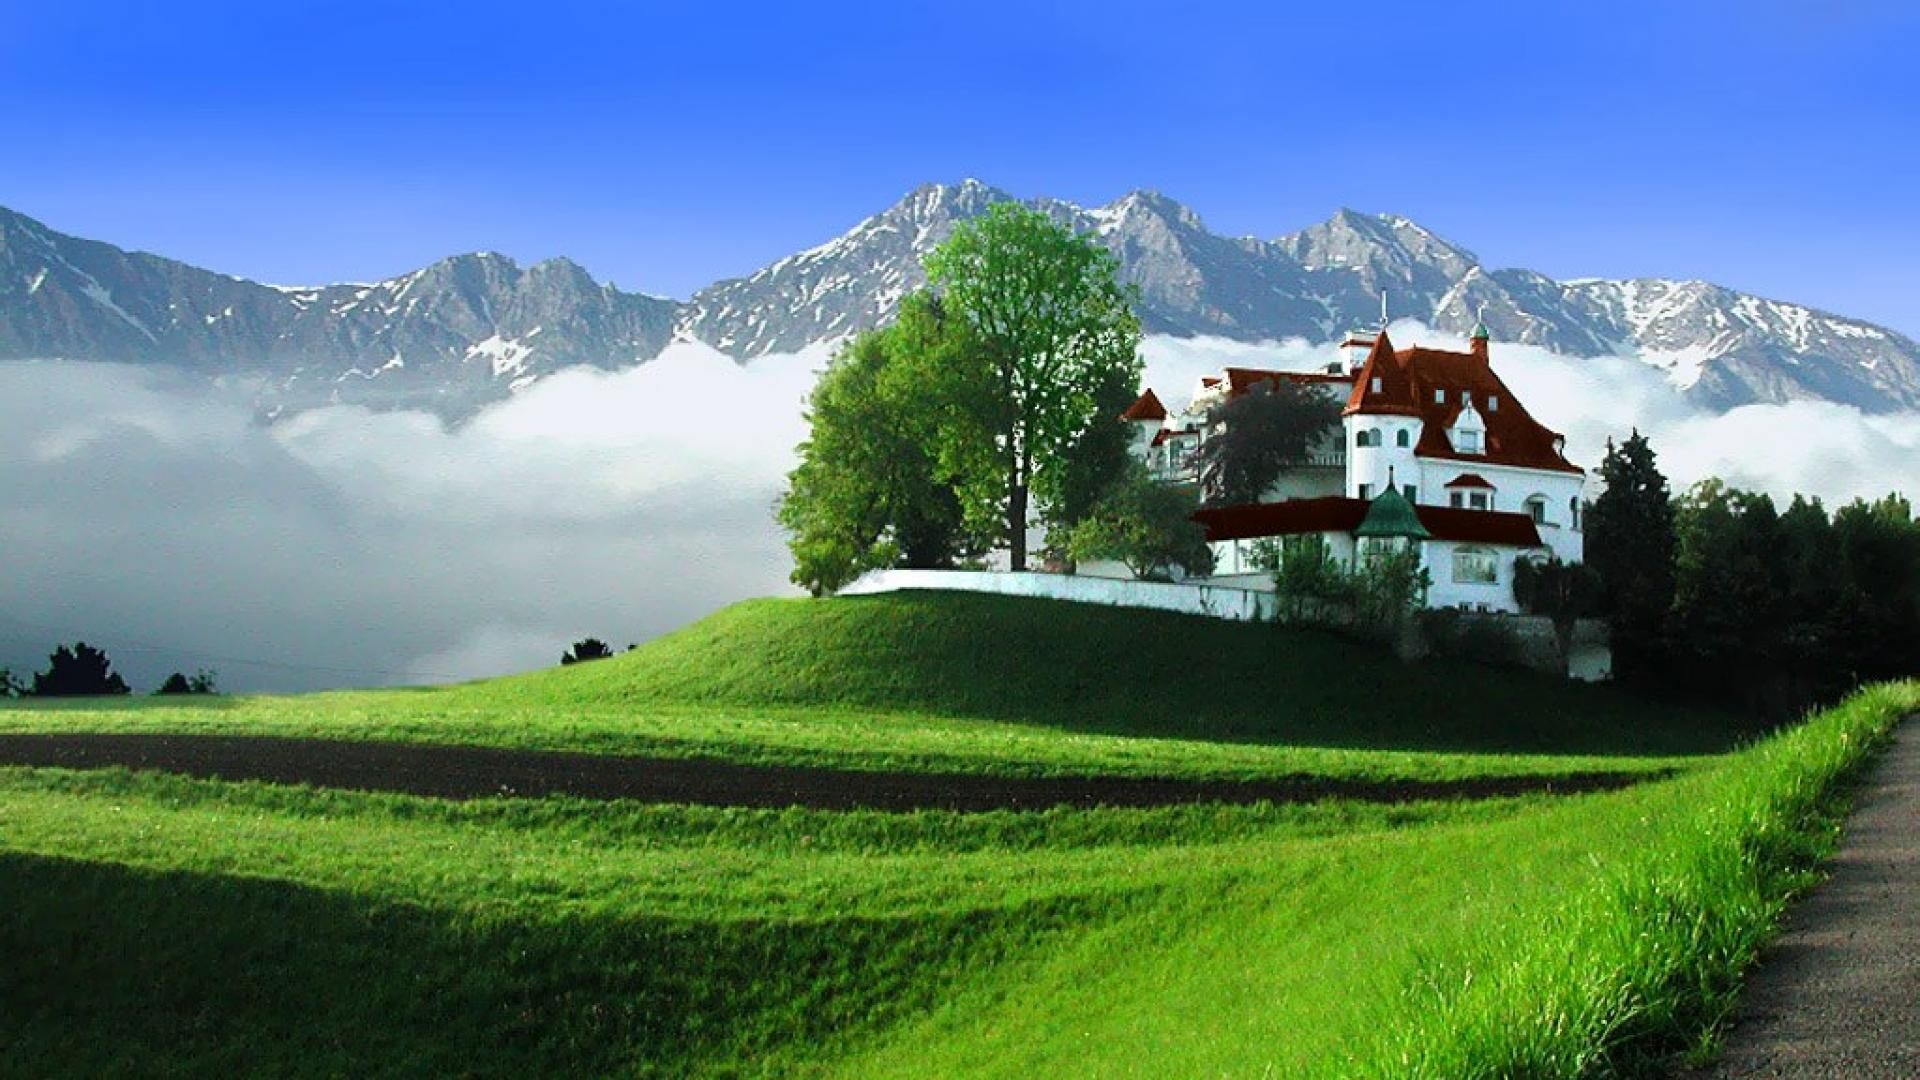 Landscape: An Austrian castle surrounded by the Alpine meadows, Amazing Alps. 1920x1080 Full HD Wallpaper.